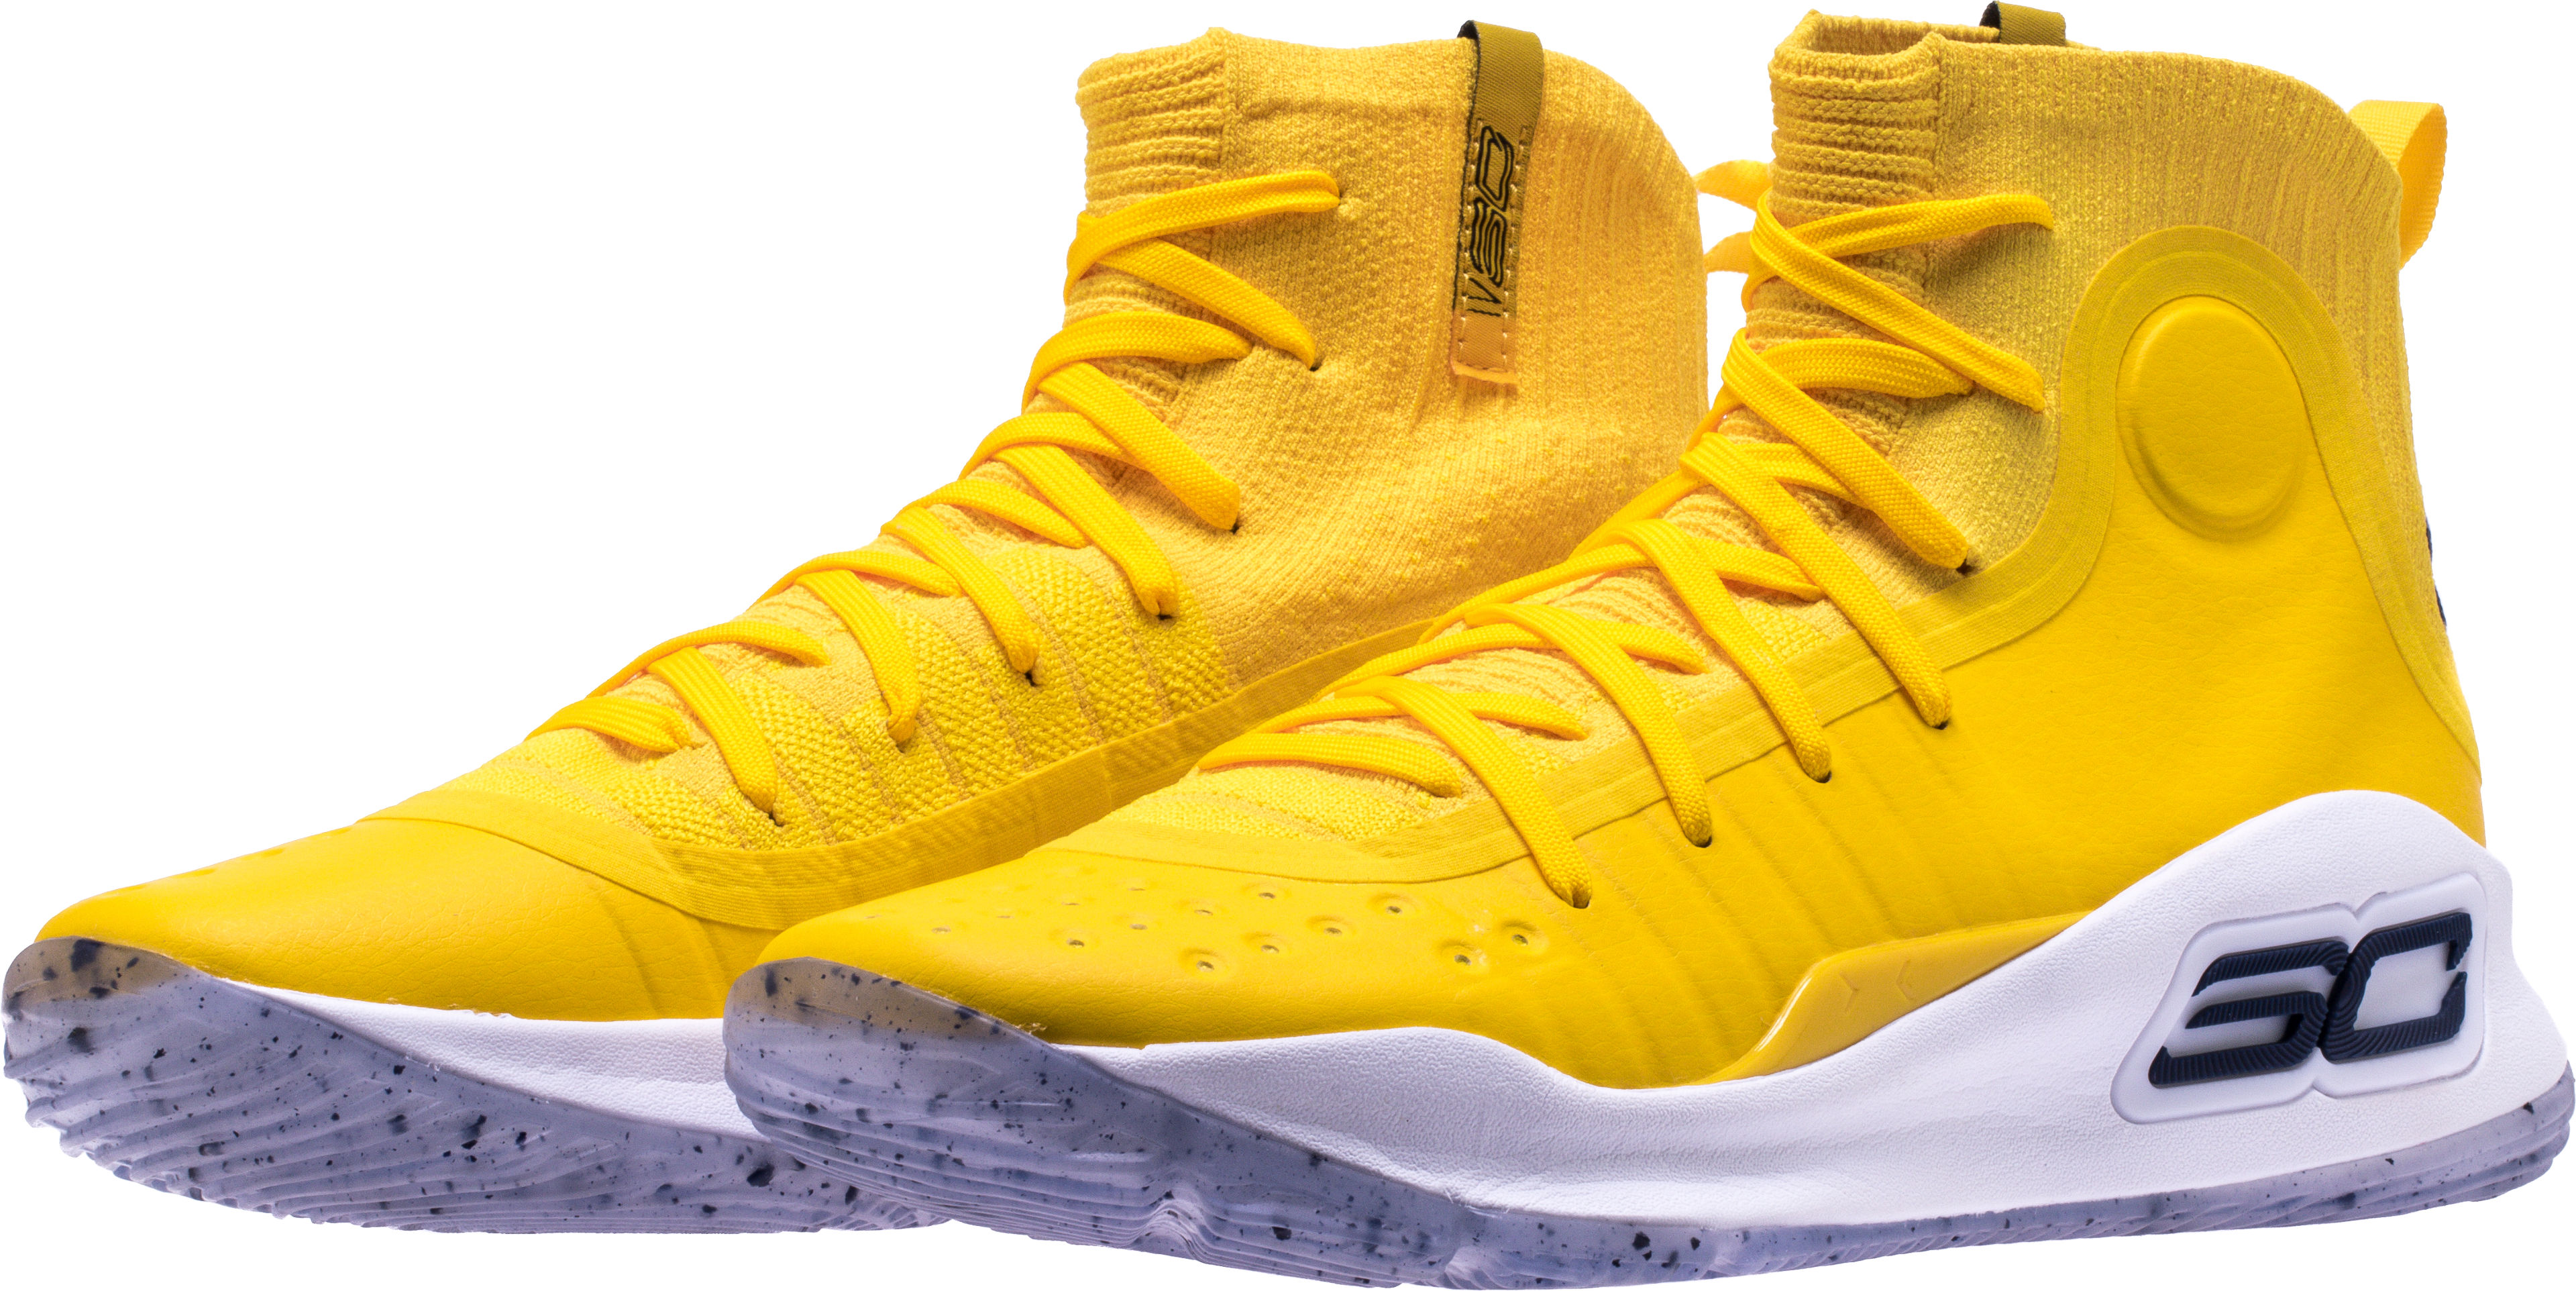 under armour curry 4 yellow 3